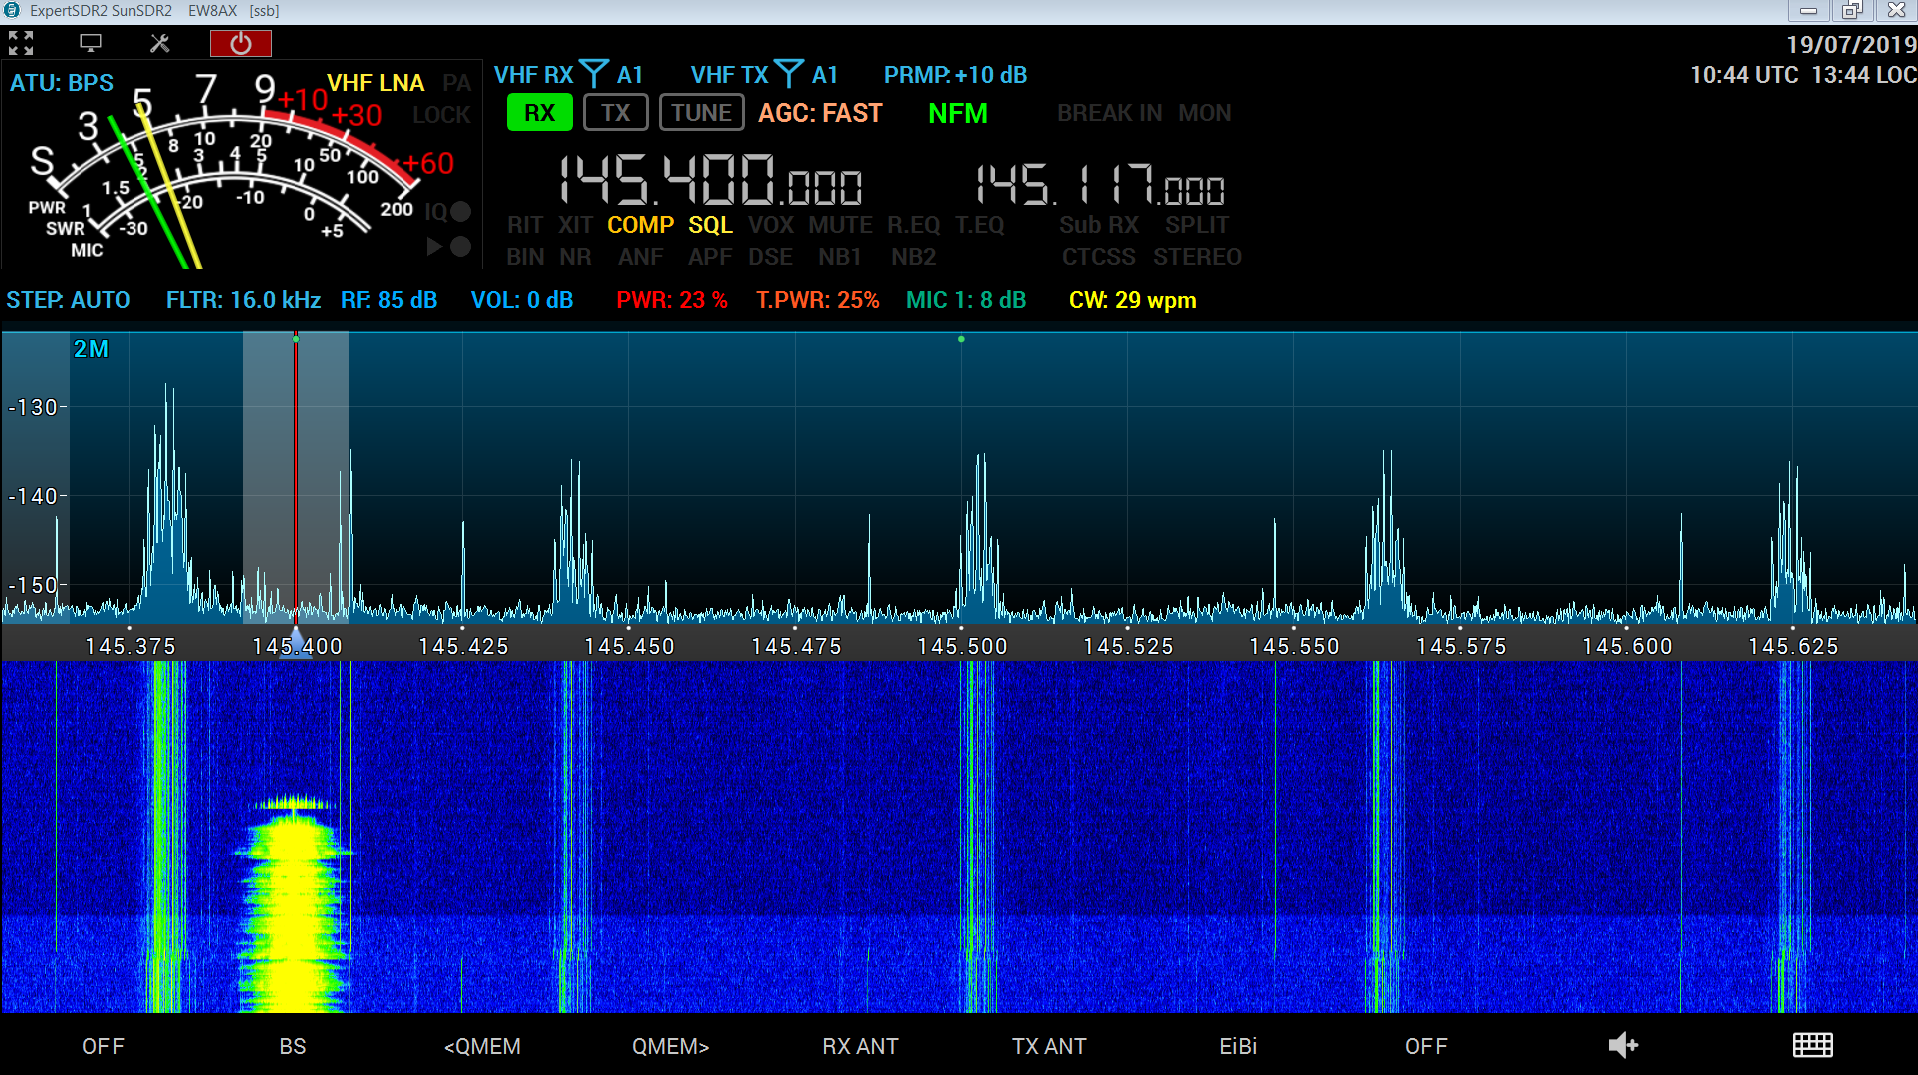 ew8ax MB1 software on Sunsdr2